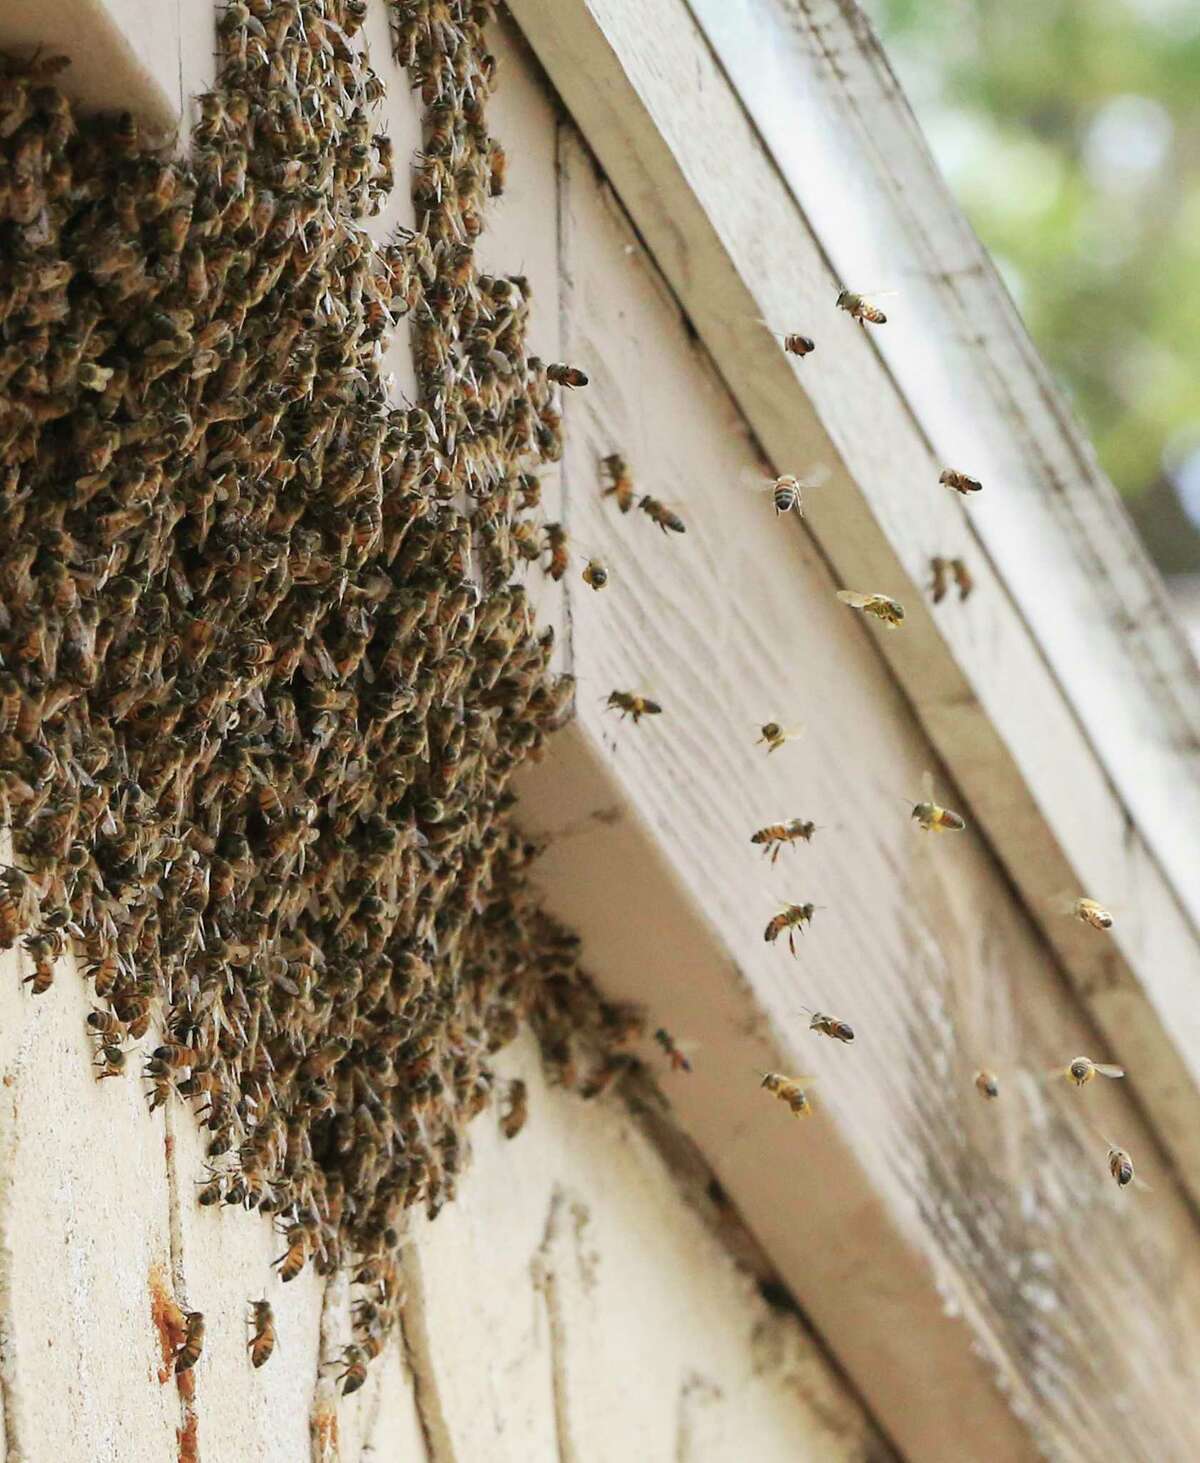 bee hive removal